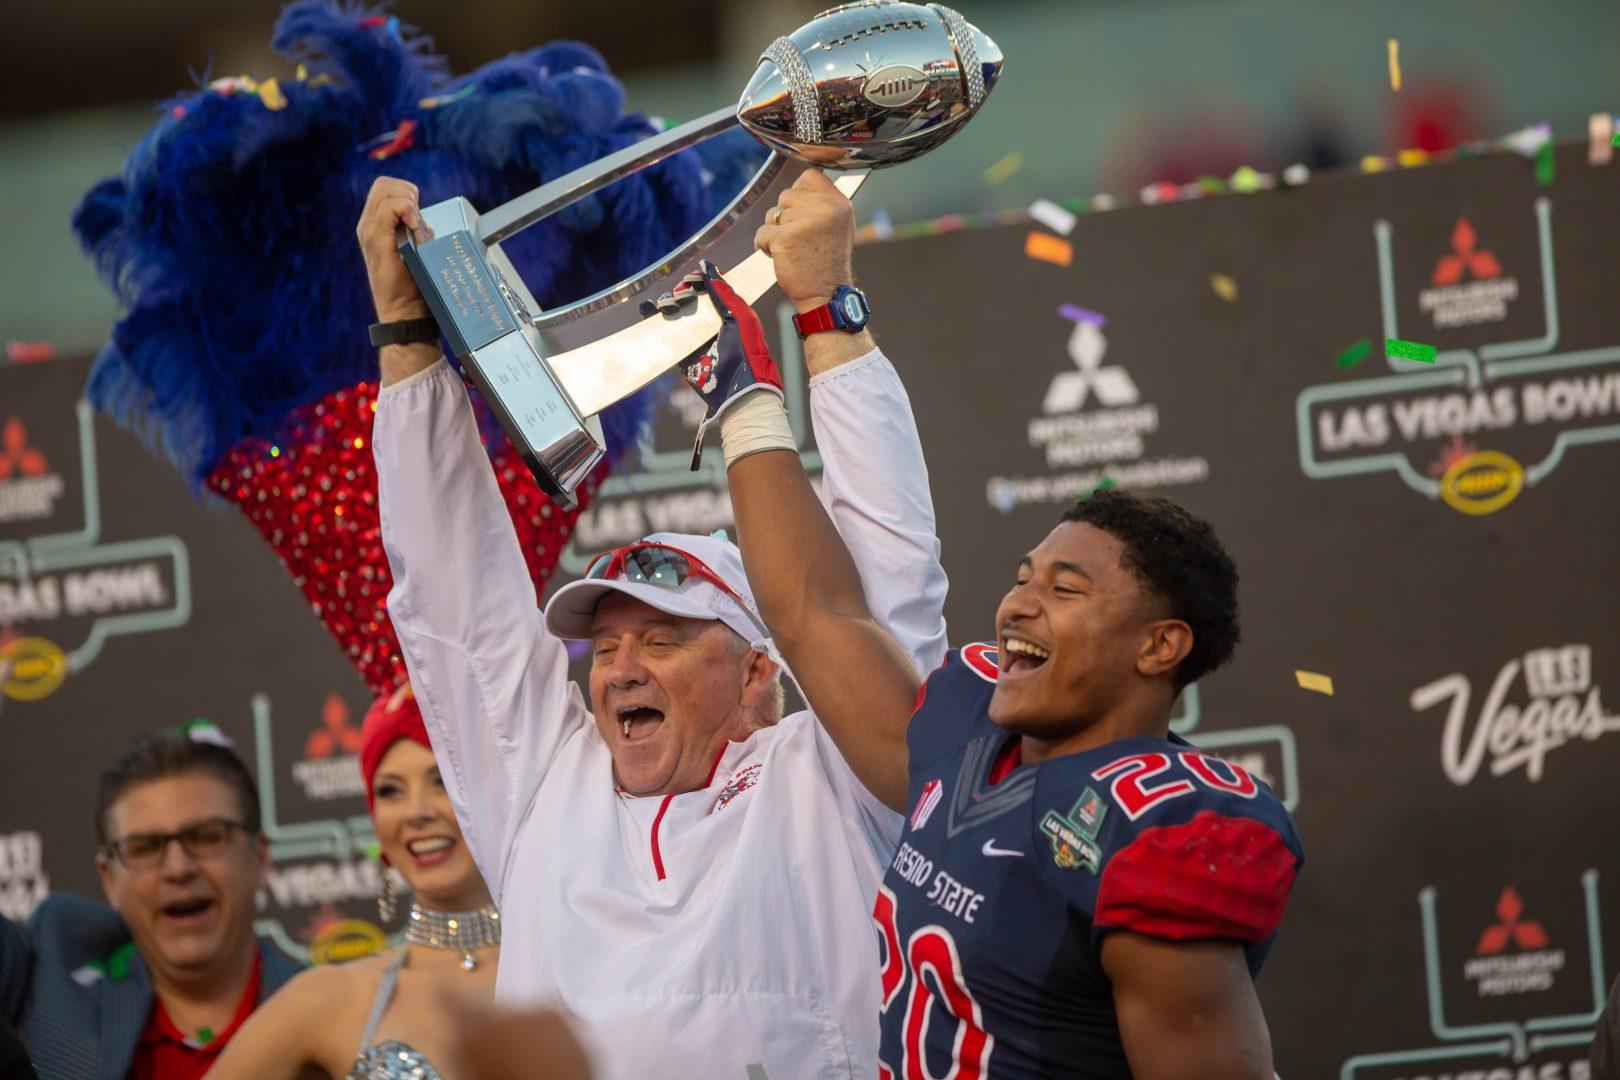 Fresno State head coach Jeff Tedford and 2018 Las Vegas Bowl MVP running back Ronnie Rivers celebrate as they raise the Las Vegas Bowl trophy after the Bulldog’s 31-20 victory over Arizona State at Sam Boyd Stadium on Dec. 15th , 2018.
Rivers rushed for 212 yards and two touchdowns in the victory. (Jose Romo/The Collegian)